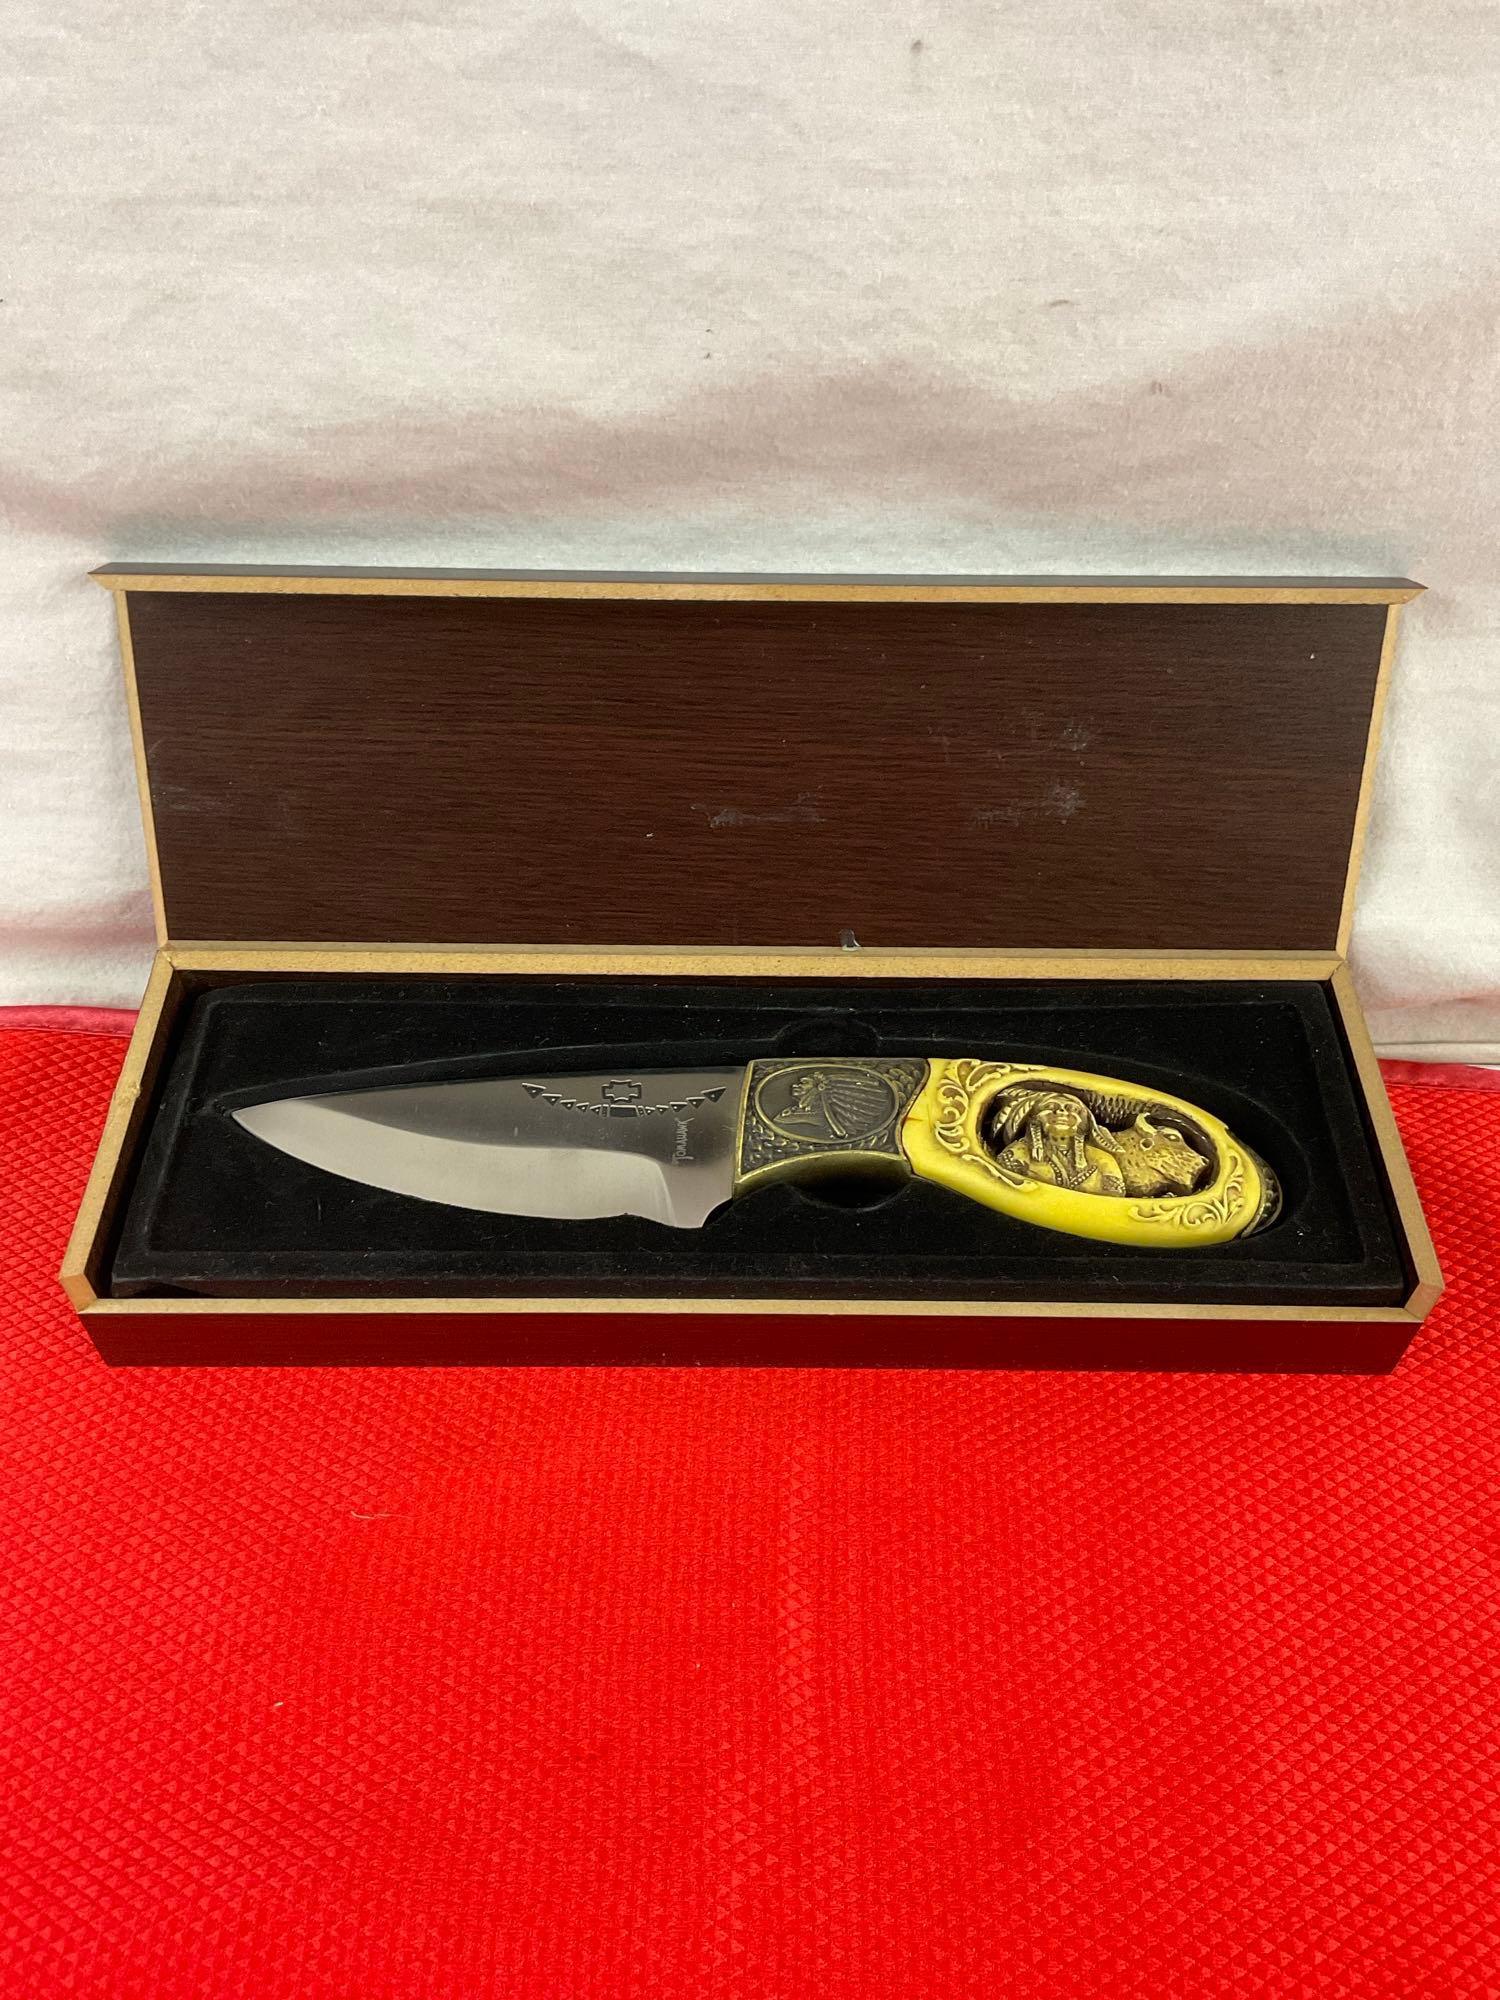 Tomahawk XL0848 Stainless Steel Fixed Blade Knife w/ Warrior Brave Carved Resin Handle. See pics.